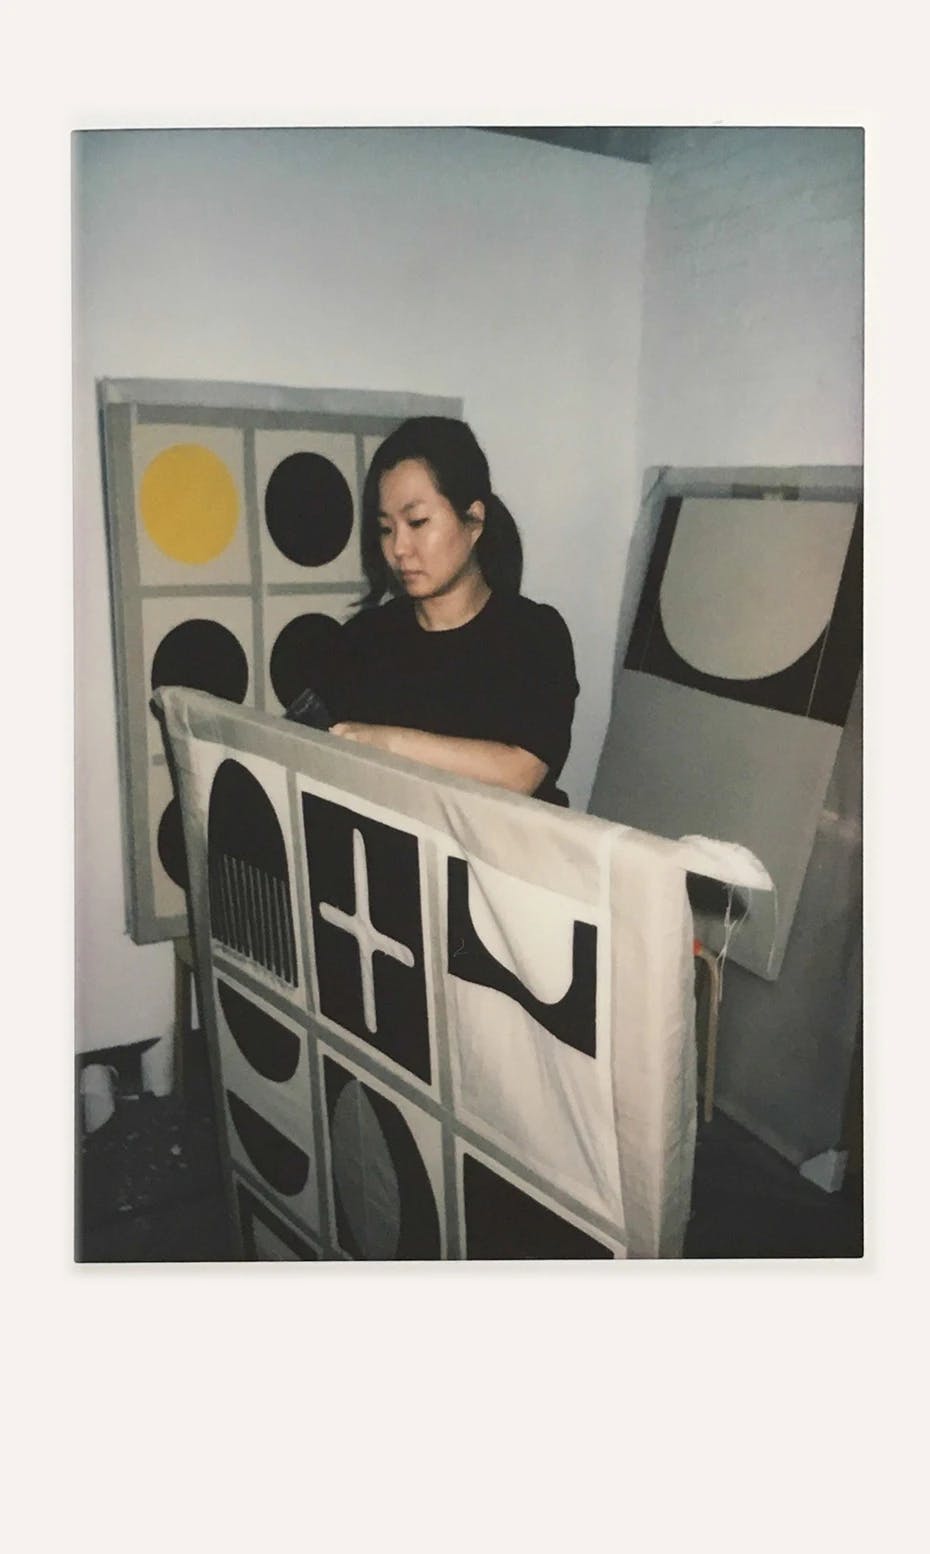 Journal: Visit with Hyun Jung Ahn: Gallery